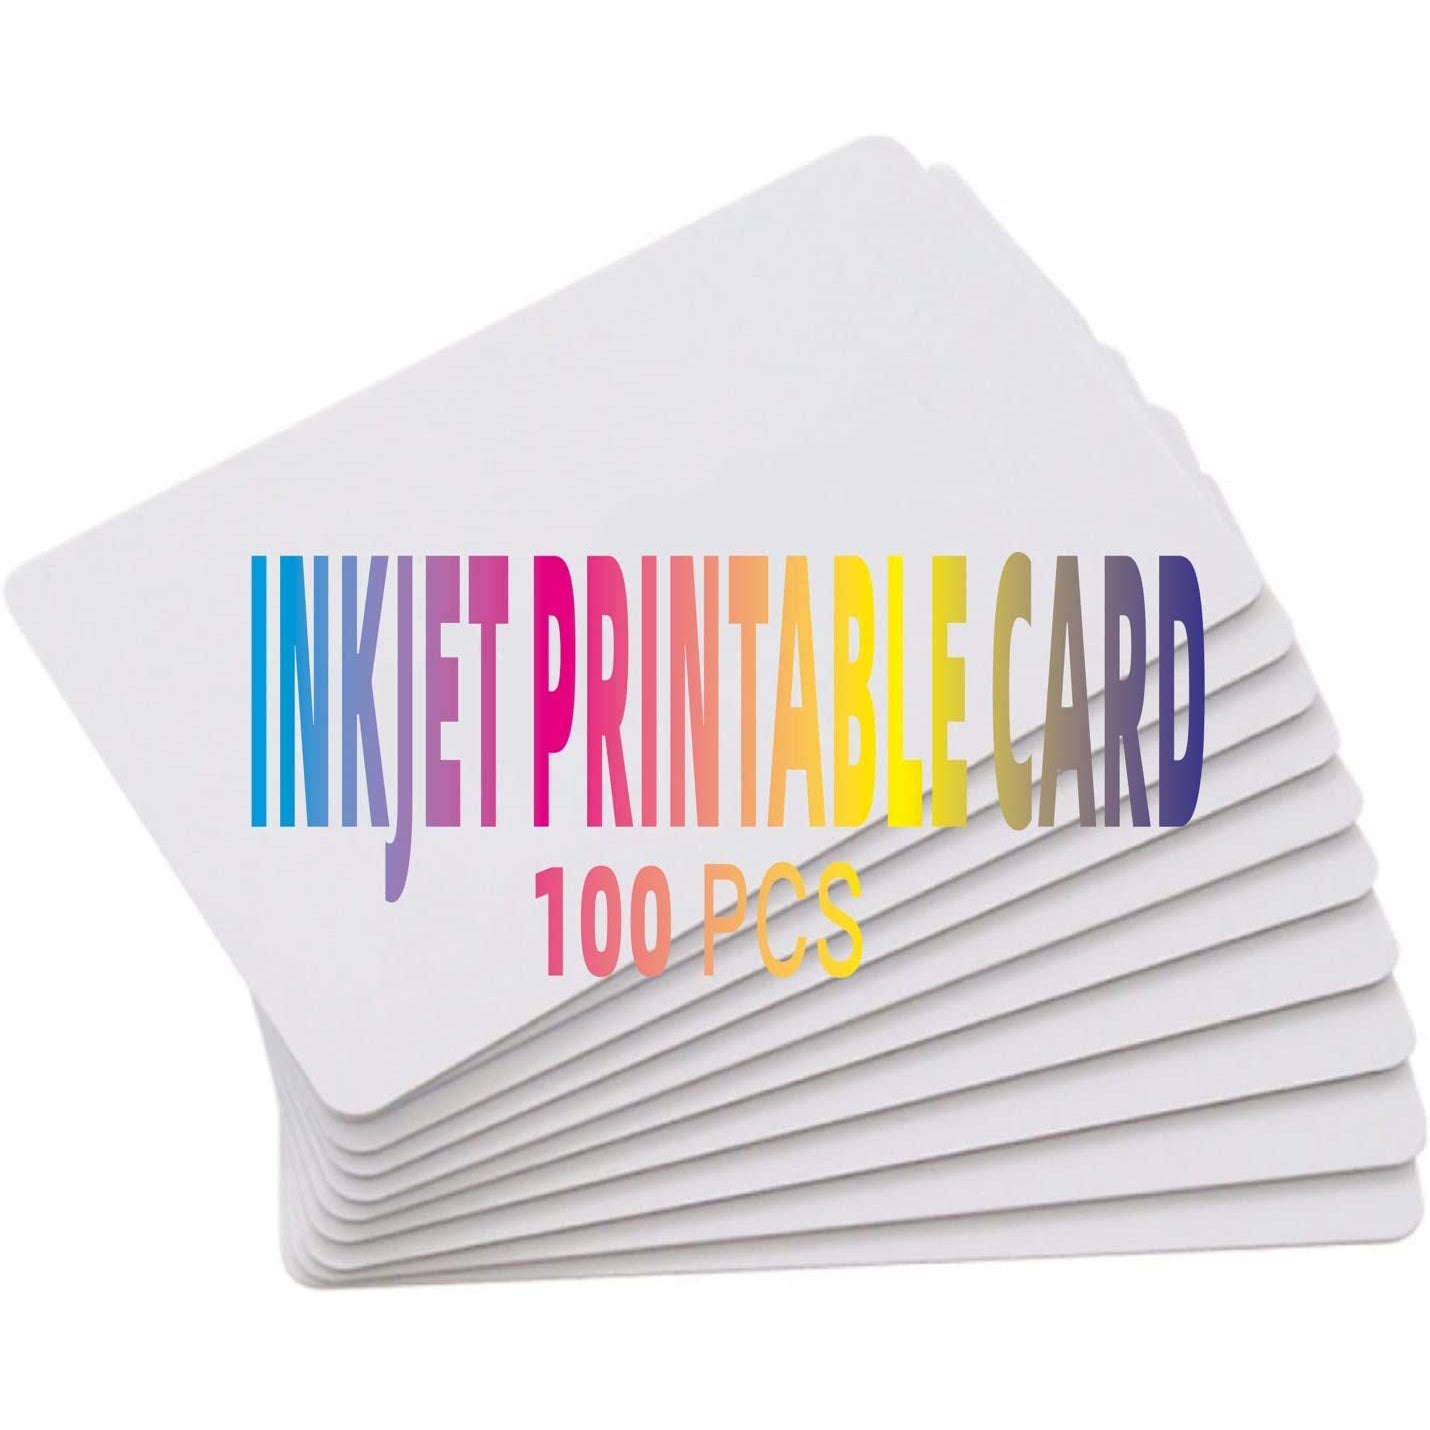 CR80 30 Mil Inkjet Printable PVC ID Cards PVC - Waterproof & Double Sided Printing - Works with Epson & Canon Inkjet Printers Gialer 100 Pack